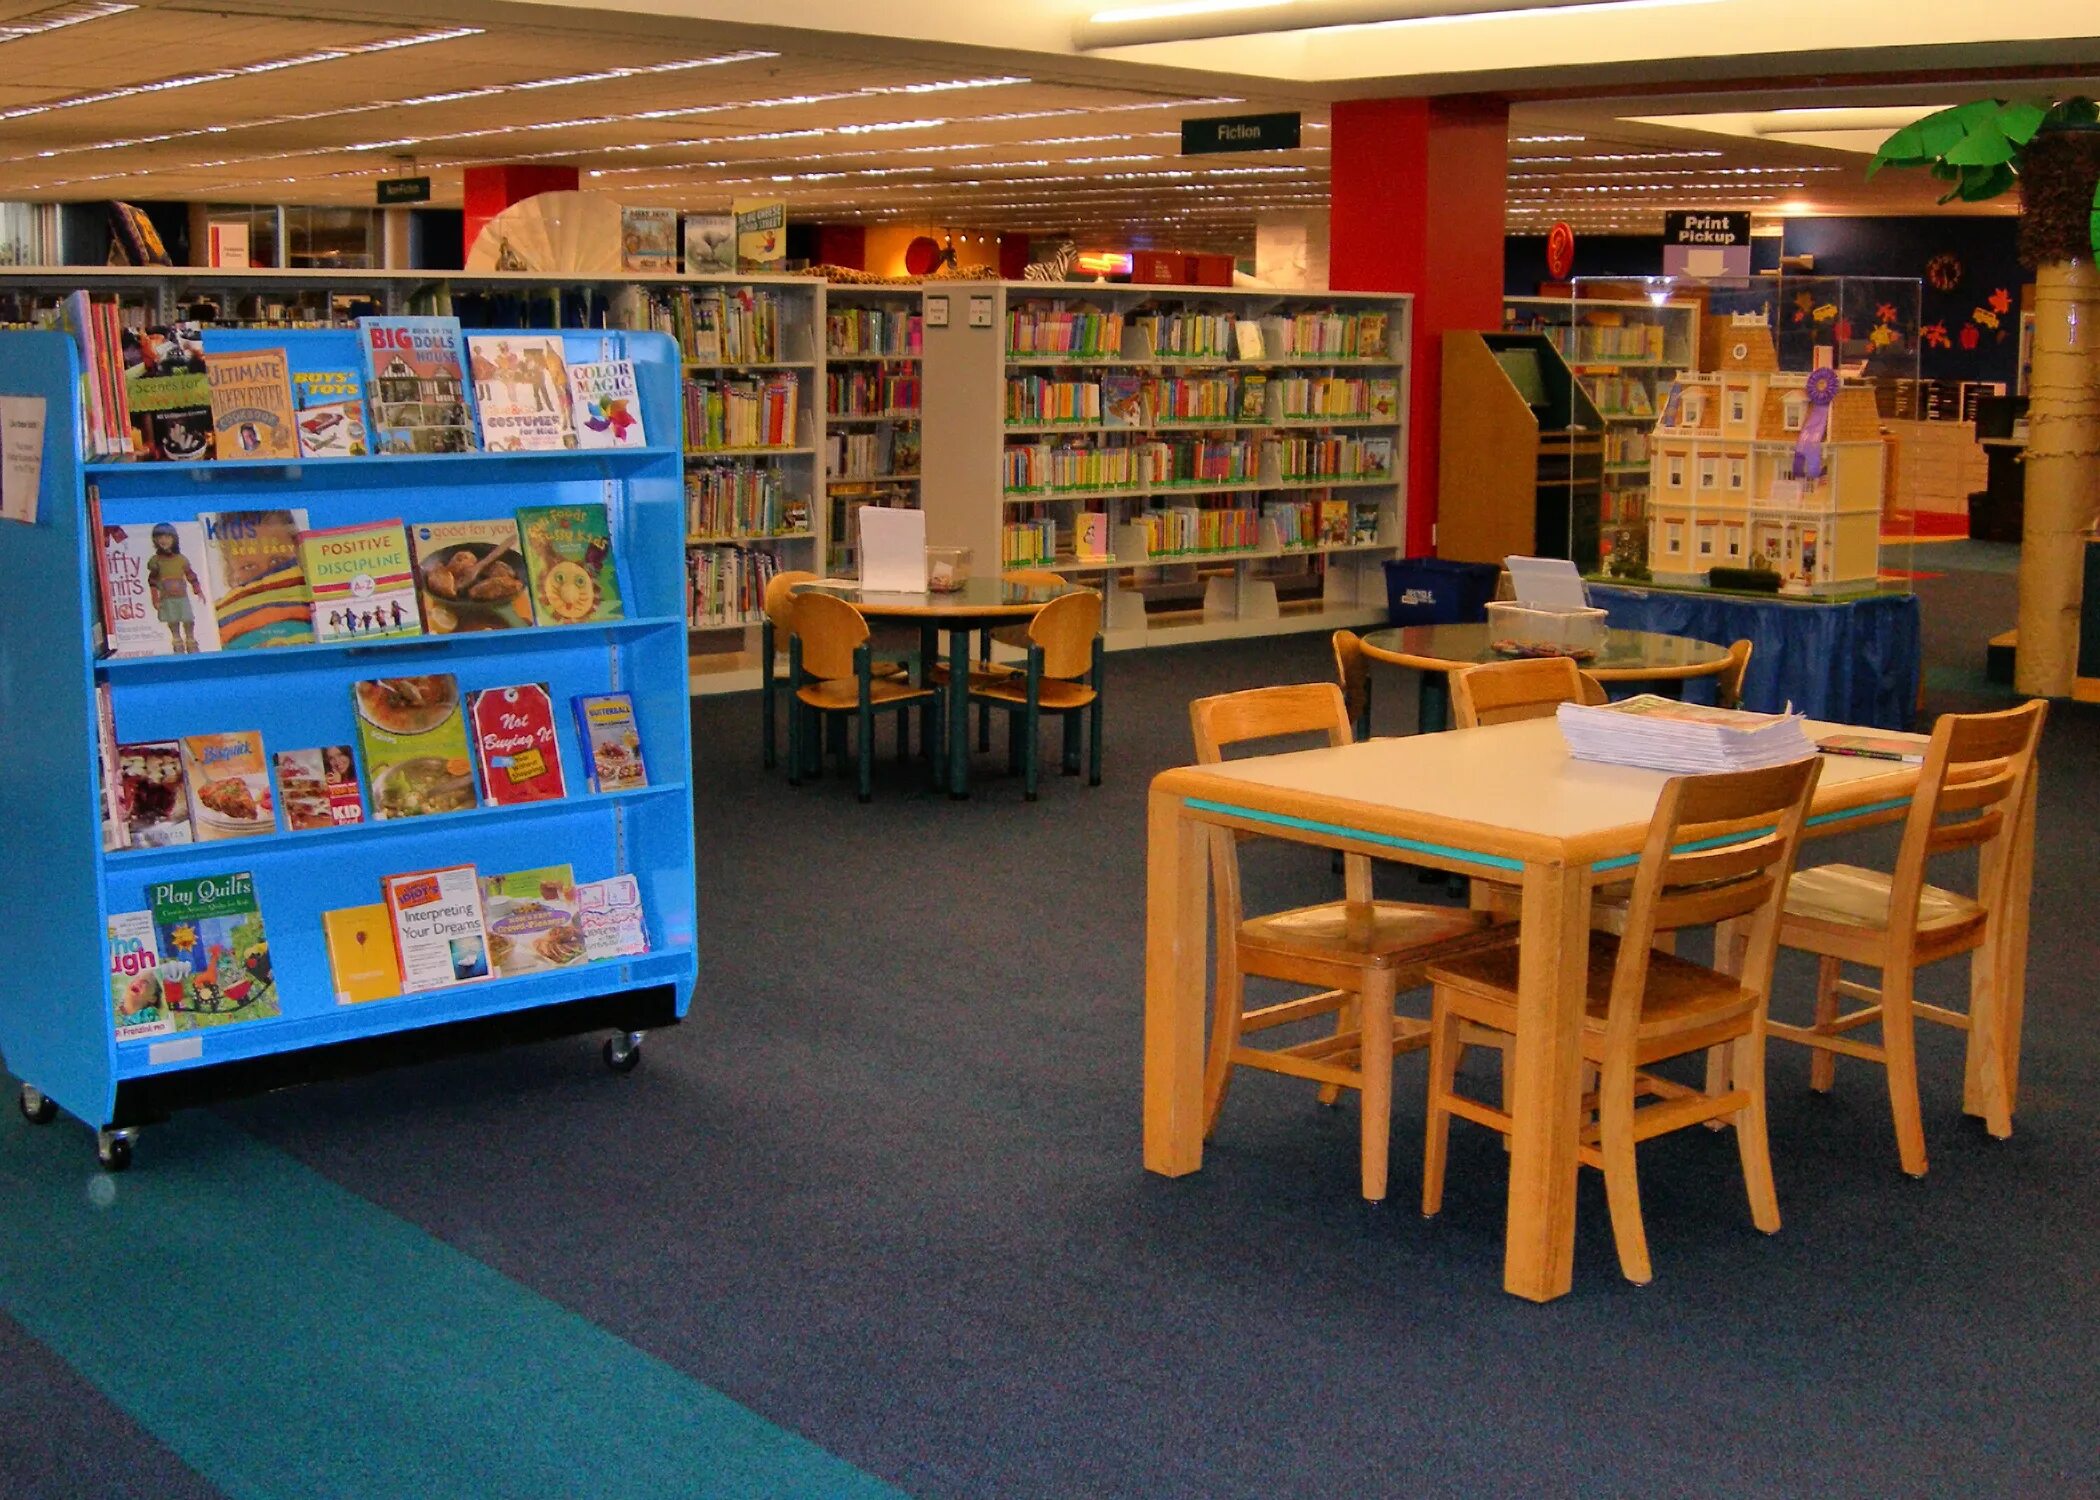 This is our library. School Library. Small School Library. Картинка at the Library. Library in School.